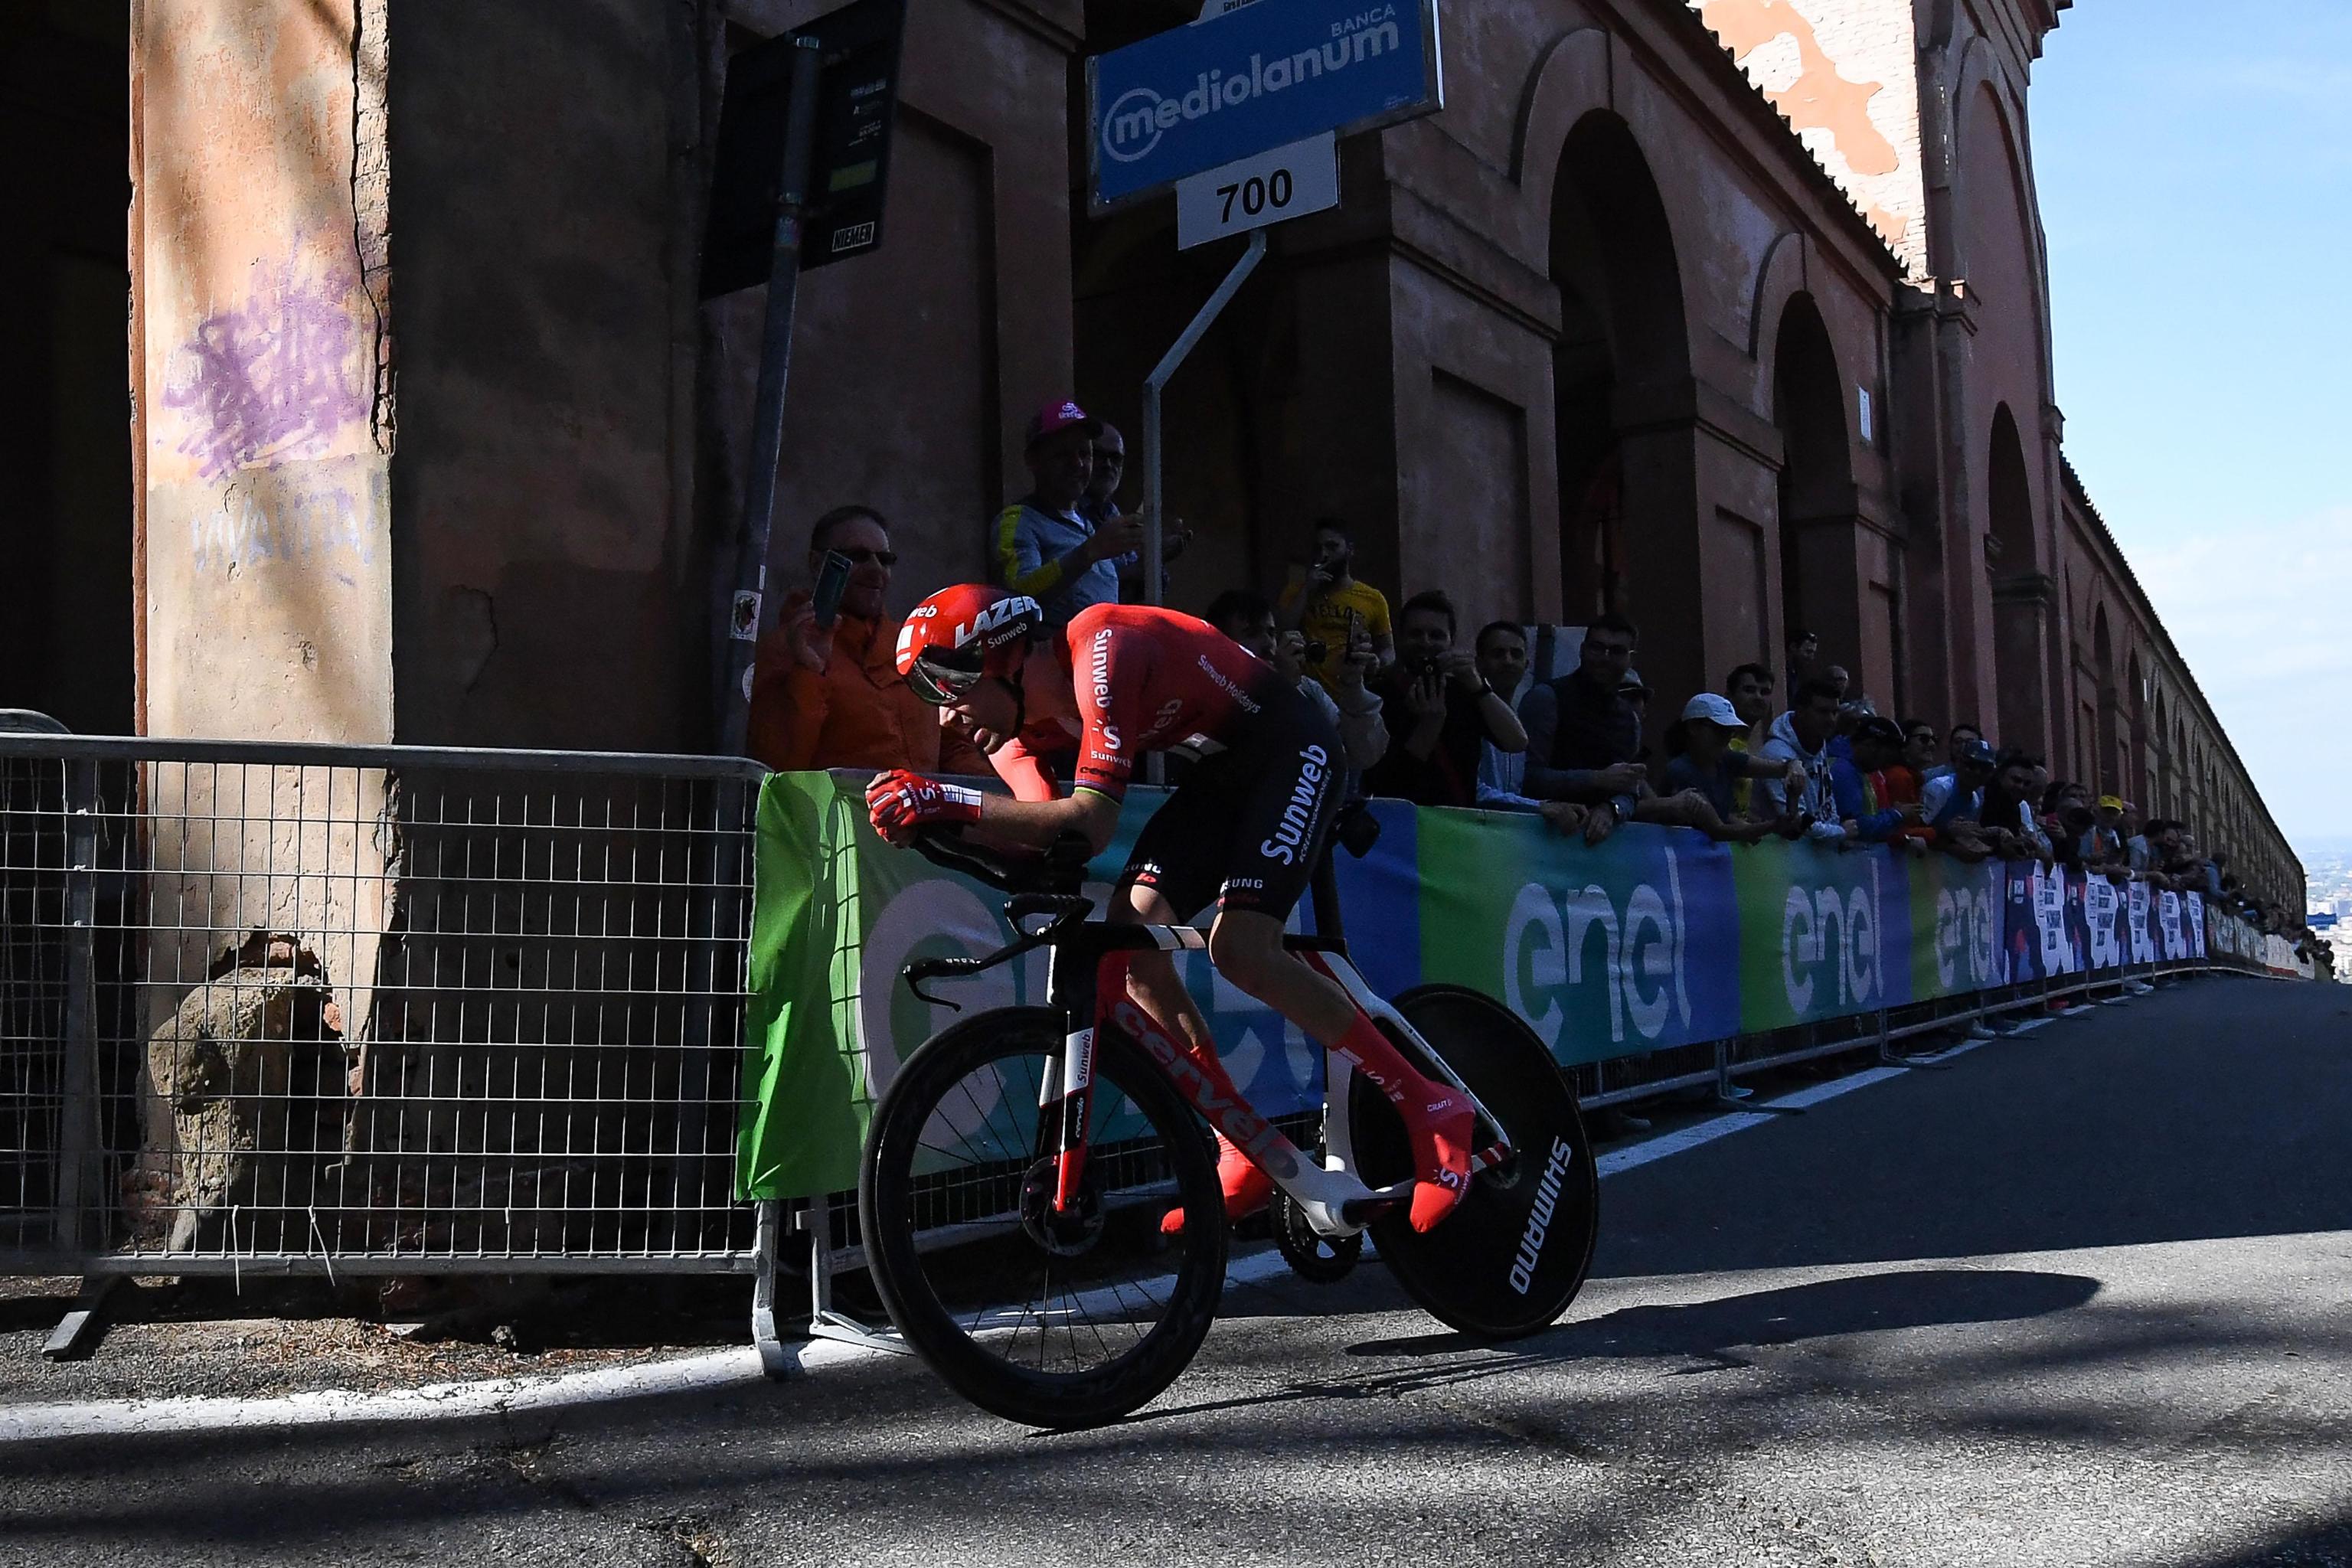 Dutch rider Tom Dumoulin of Team Sunweb in action during the 1st stage of the 102th Giro d'Italia cycling race, an individual time trial from Bologna to Bologna (San Luca), Italy, 11 May 2019. ANSA/ALESSANDRO DI MEO